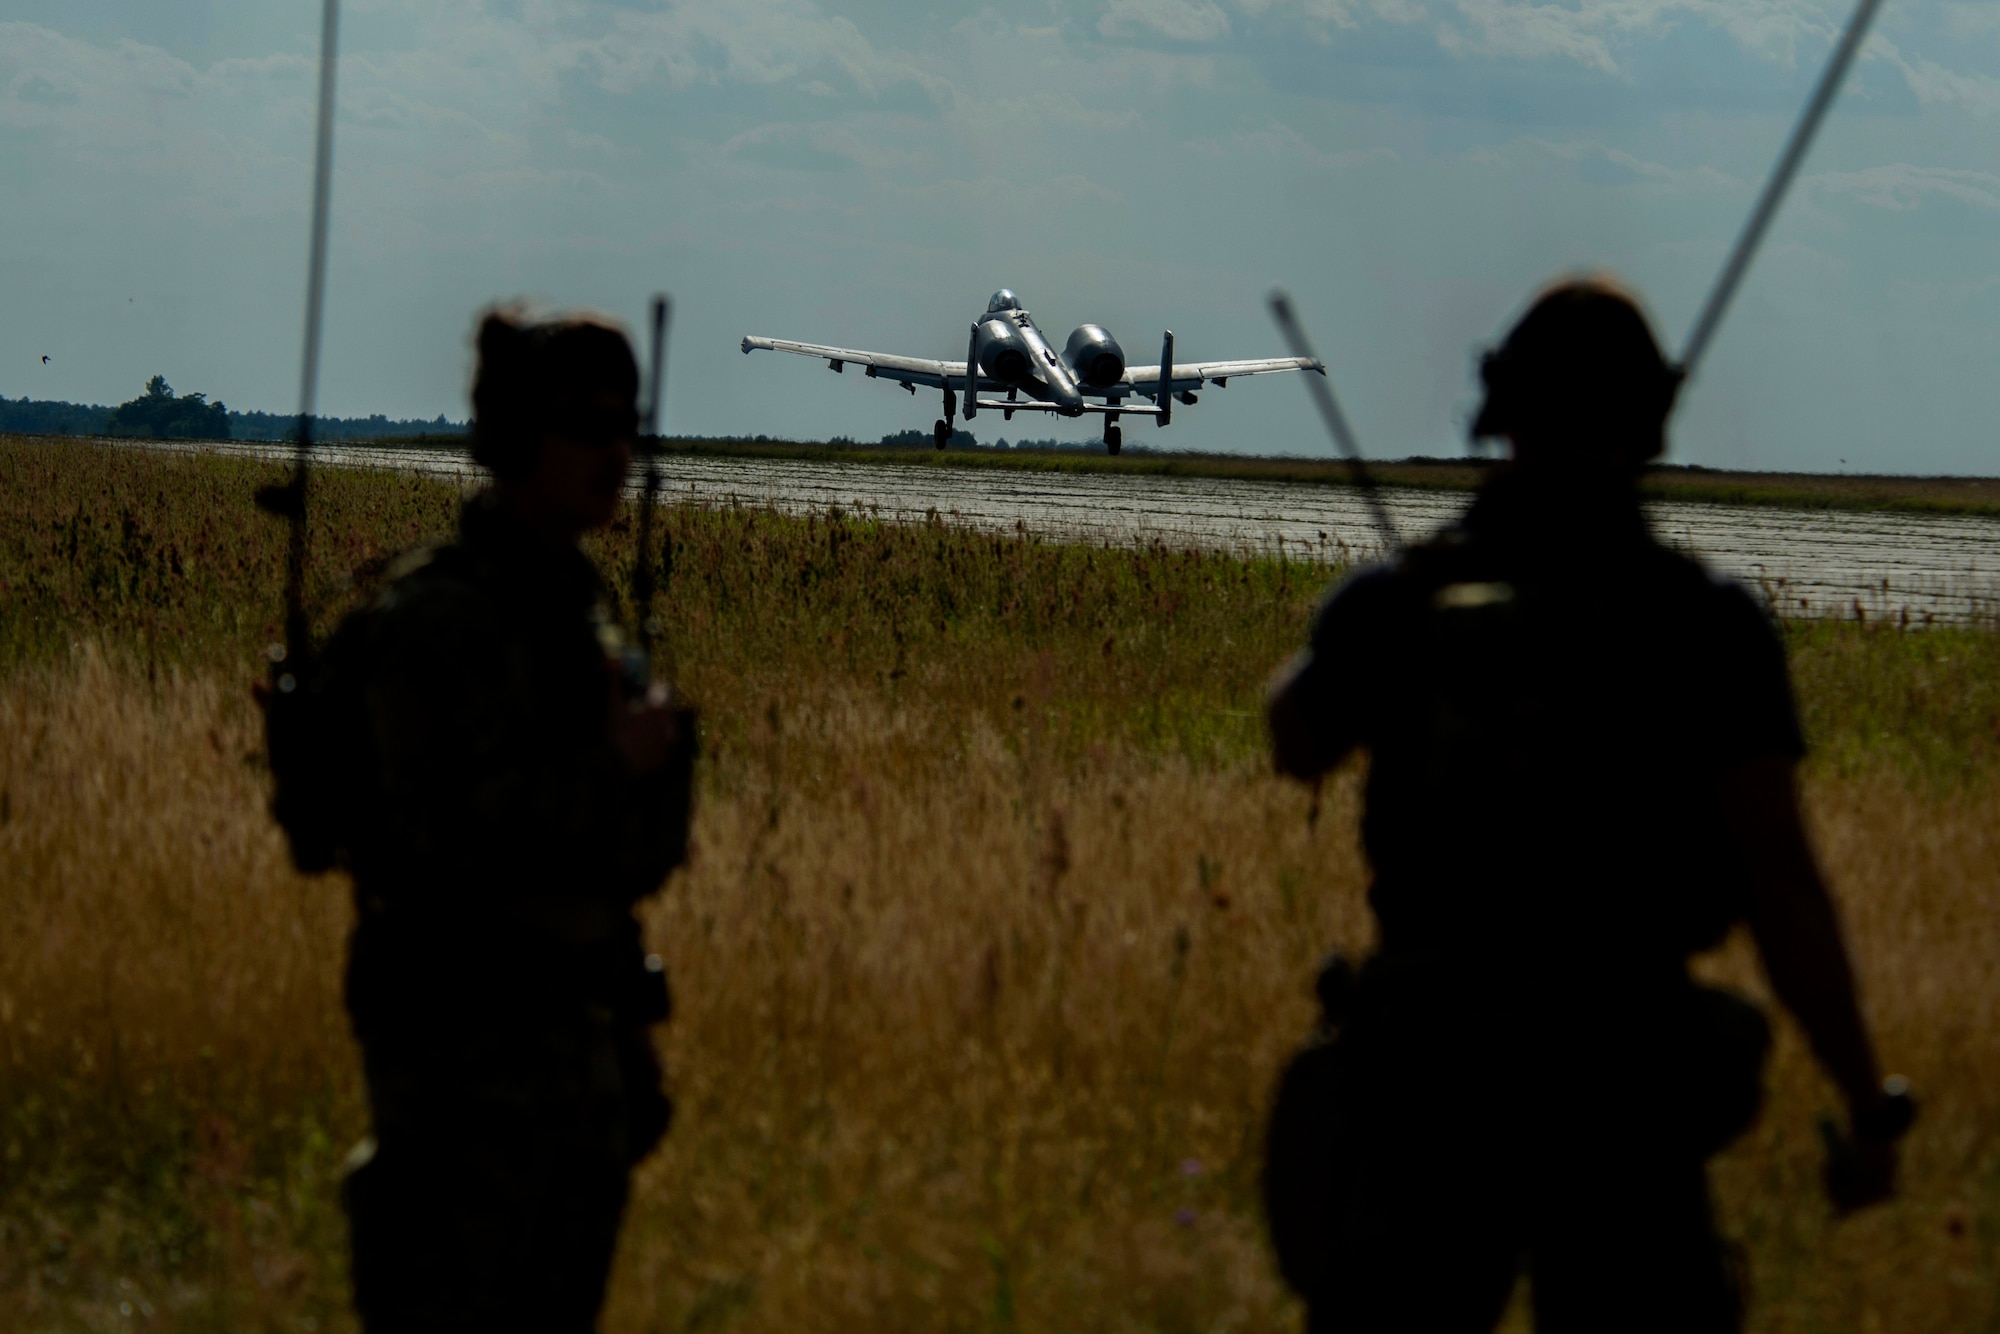 A 354th Expeditionary Fighter Squadron A-10C Thunderbolt II aircraft takes off in front of two 321st Special Tactics Squadron combat controllers during an austere landing training exercise at Nowe Miasto, Poland, July 20, 2015. The 321st STS combat controllers ground air traffic control for the A-10 pilots during the exercise. (U.S. Air Force photo by Airman 1st Class Luke Kitterman)